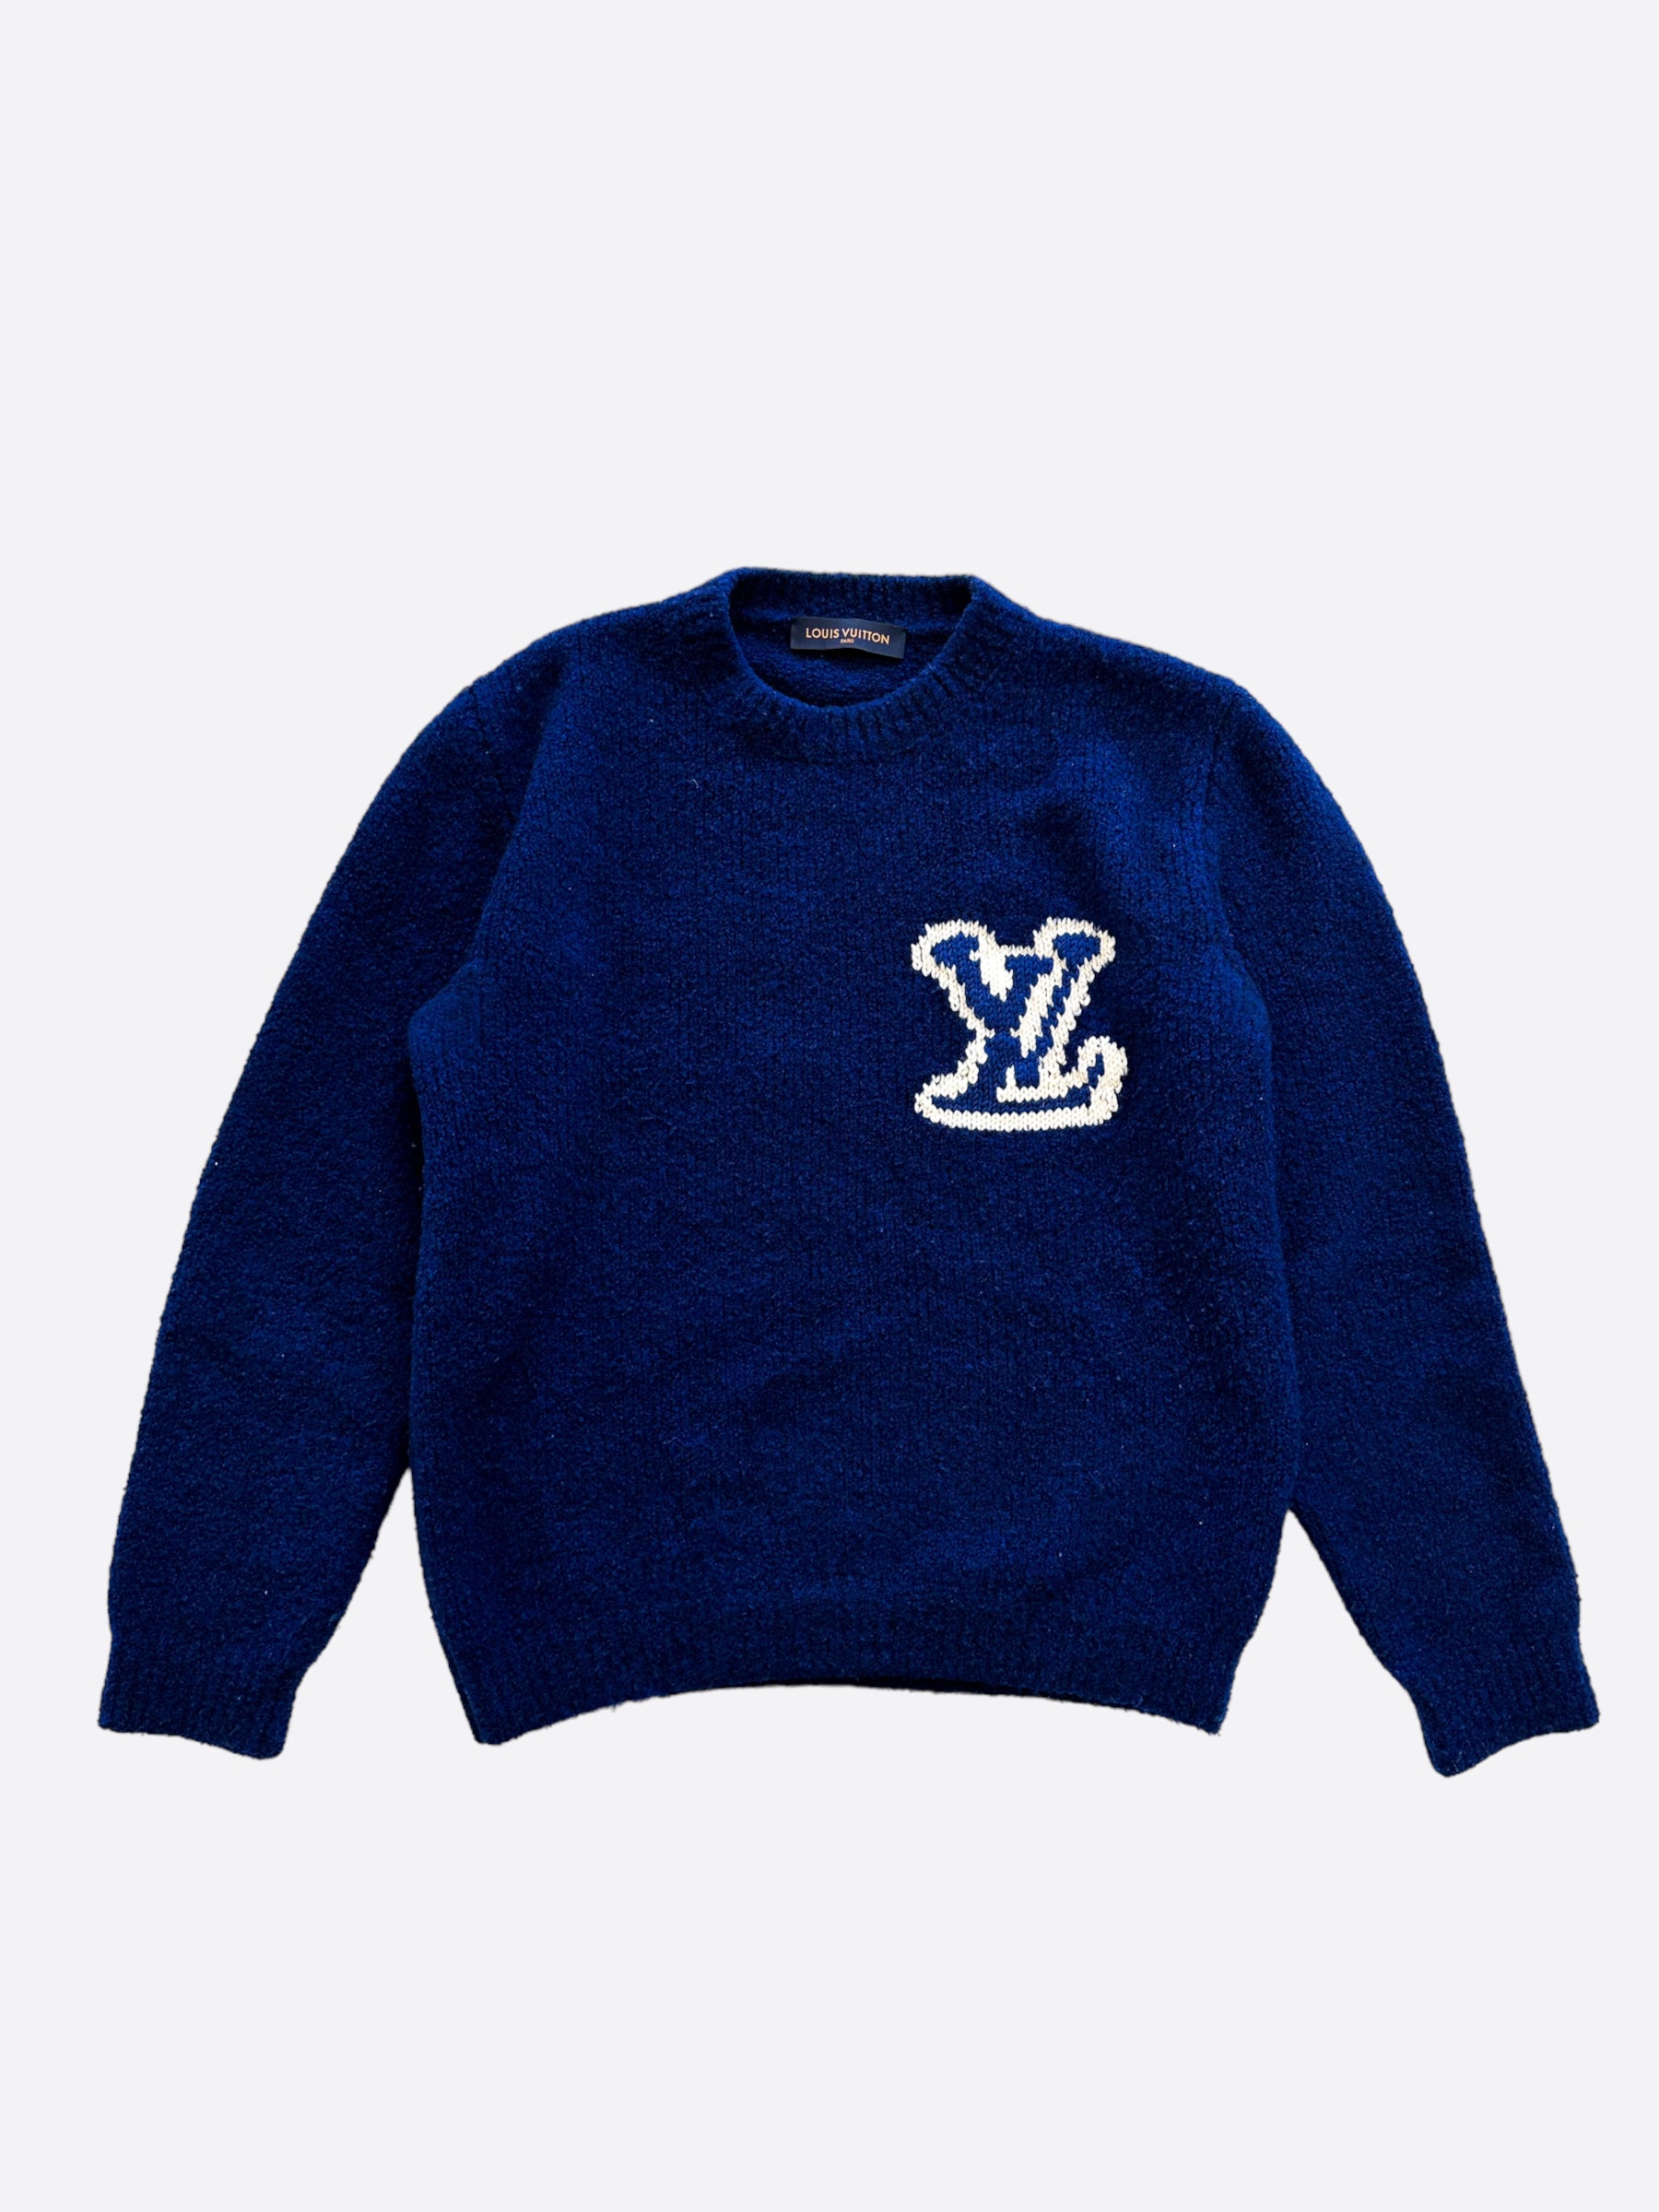 Blue Louis Vuitton Sweater - 13 For Sale on 1stDibs  louis vuitton blue  and white sweater, louis vuitton sweater blue and white, lv blue sweater